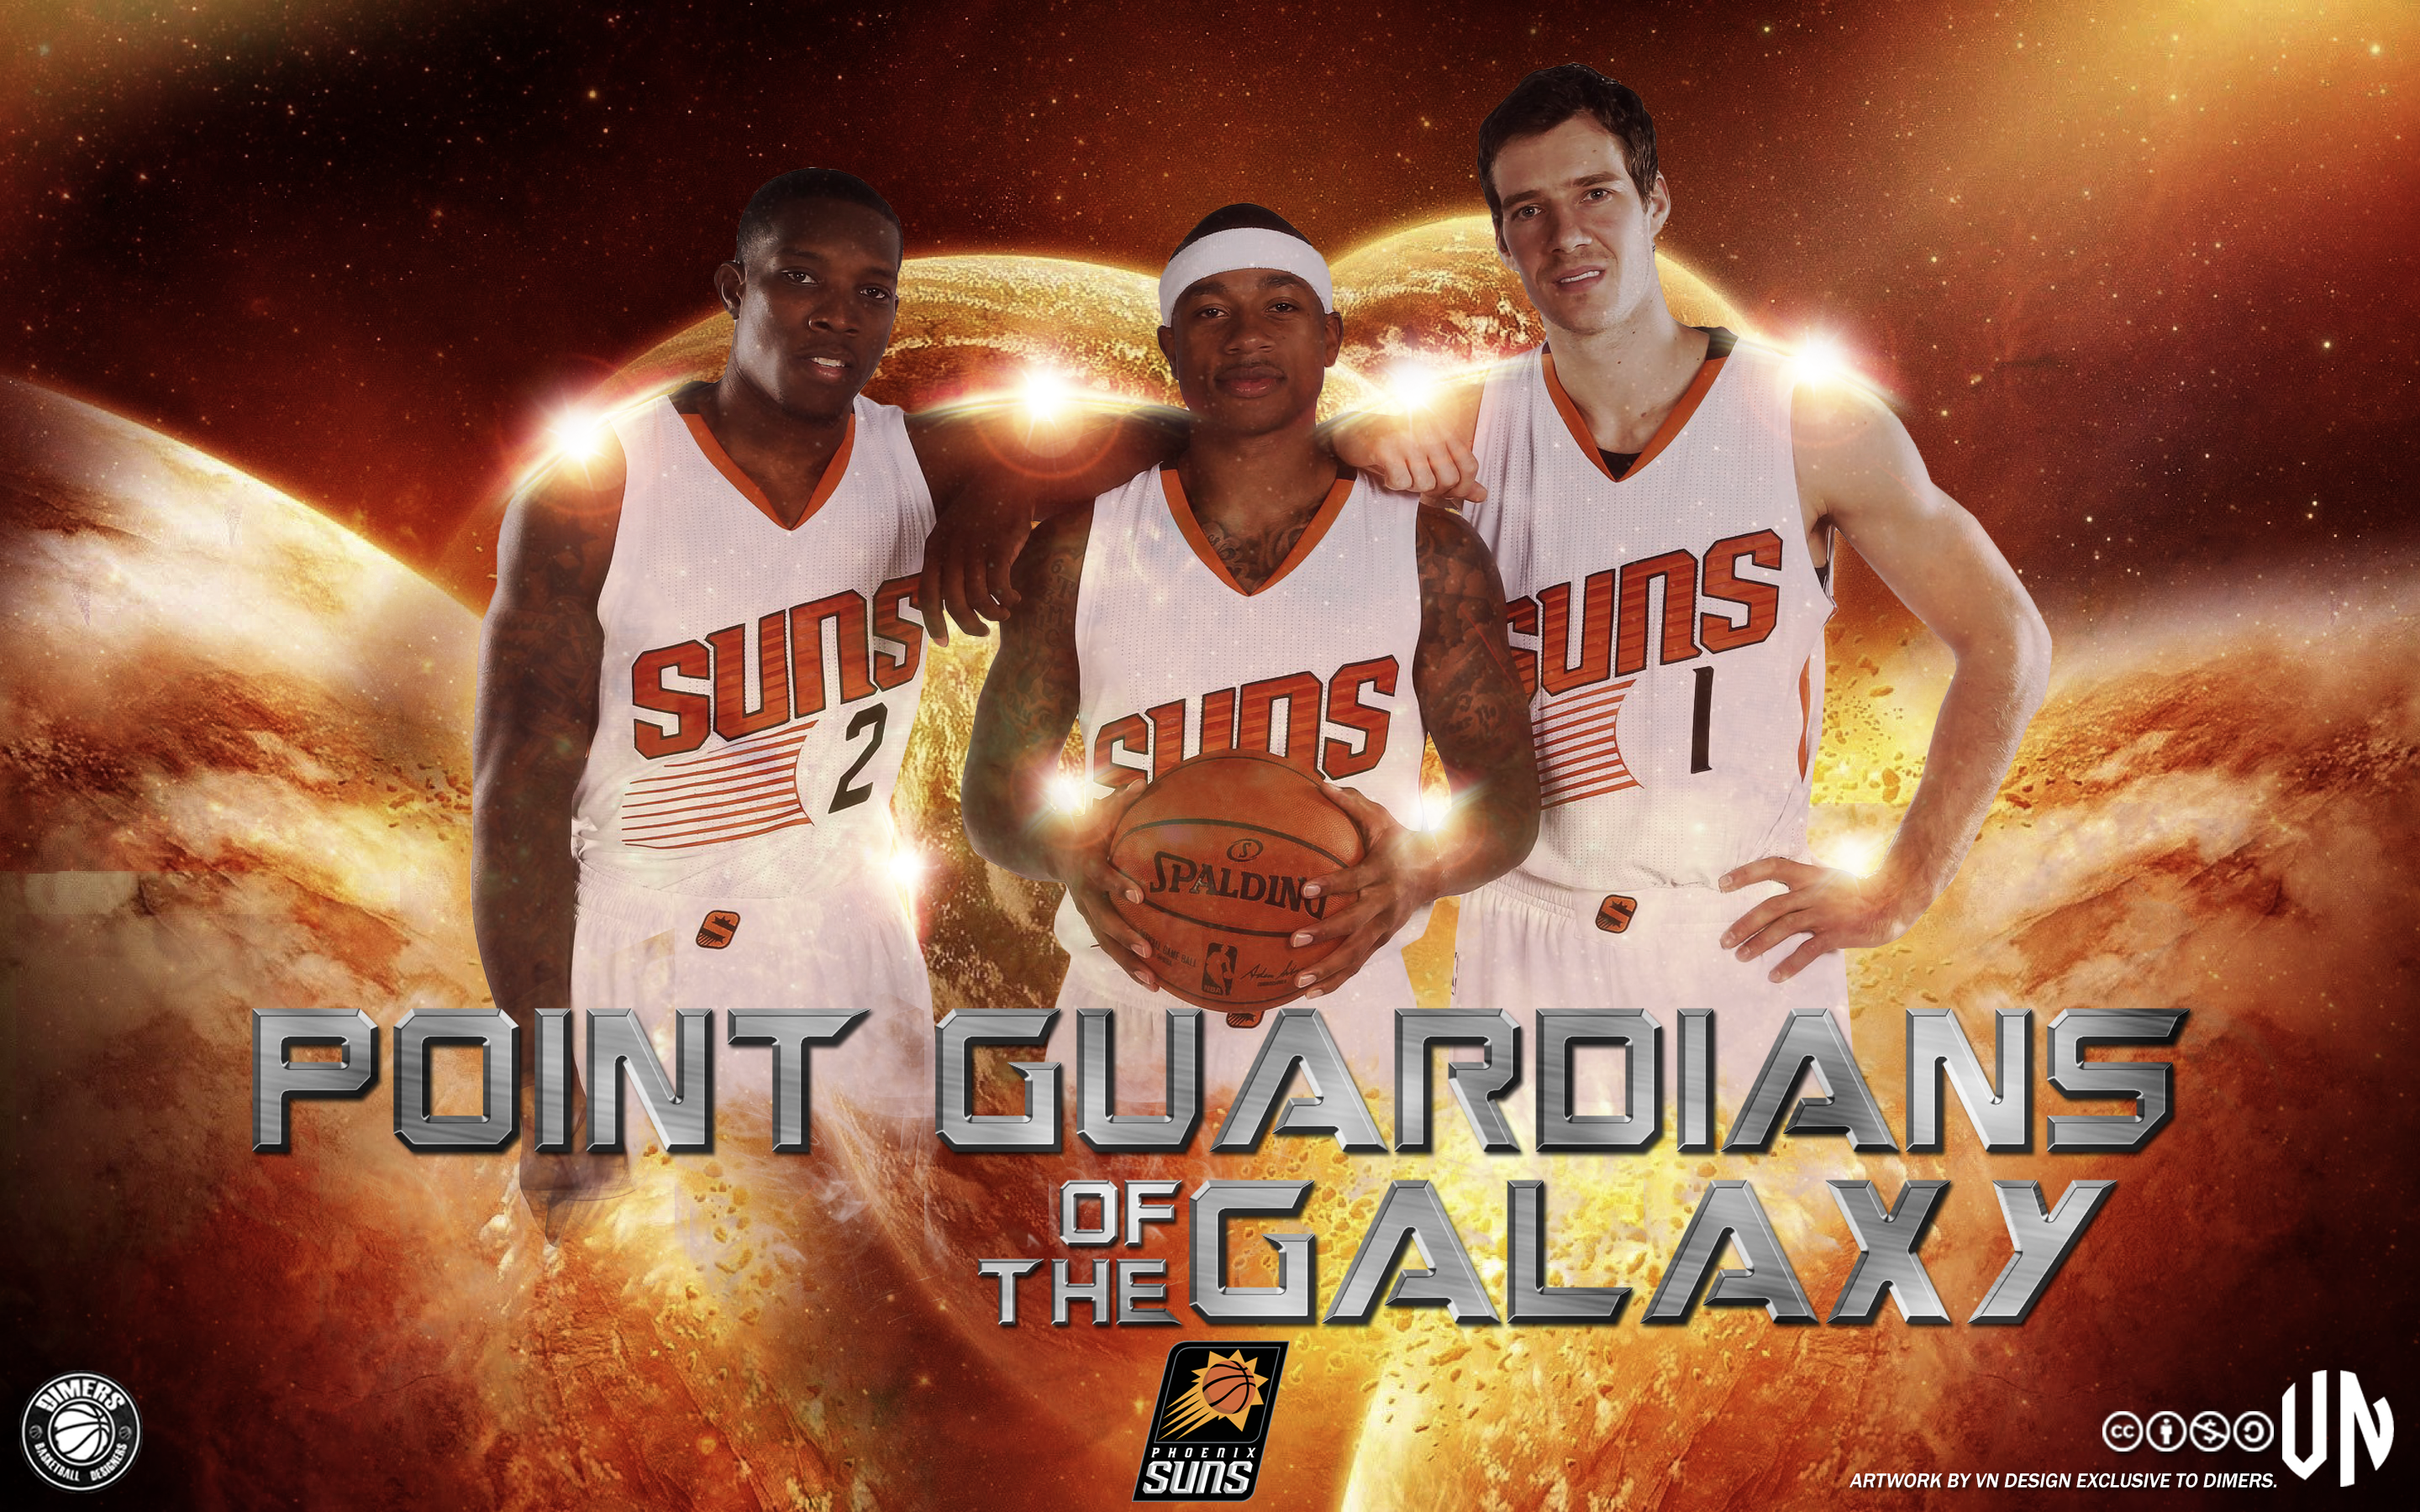  Suns success from last year cant be repeated and the Suns end up